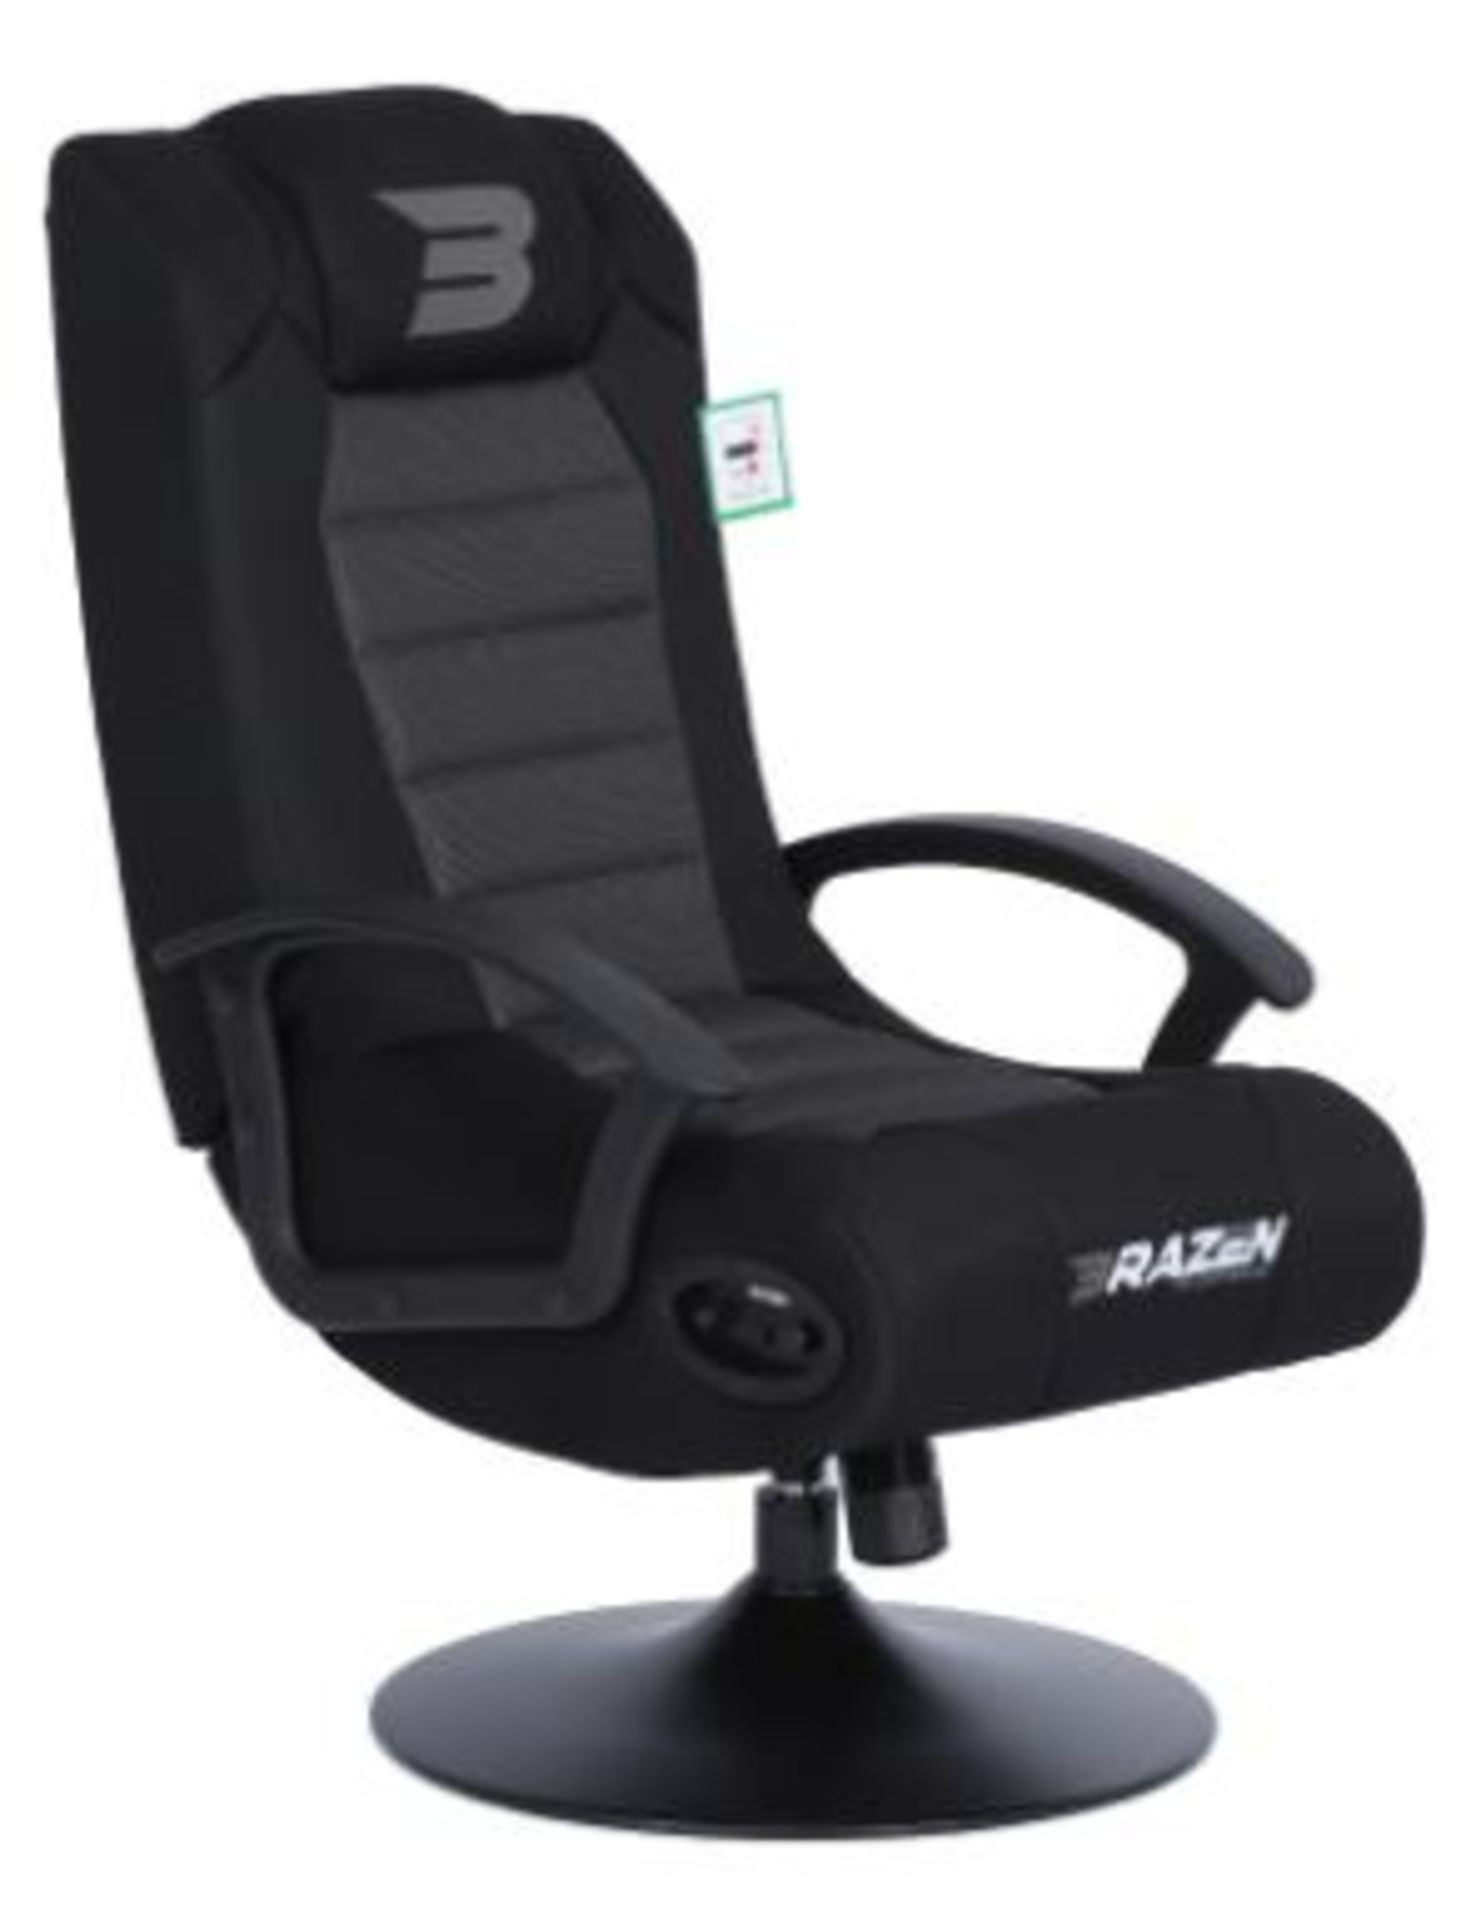 (P3) 1x BraZen Stag 2.1 Bluetooth Surround Sound Gaming Chair RRP £149.99. Lot Appears Complete. I